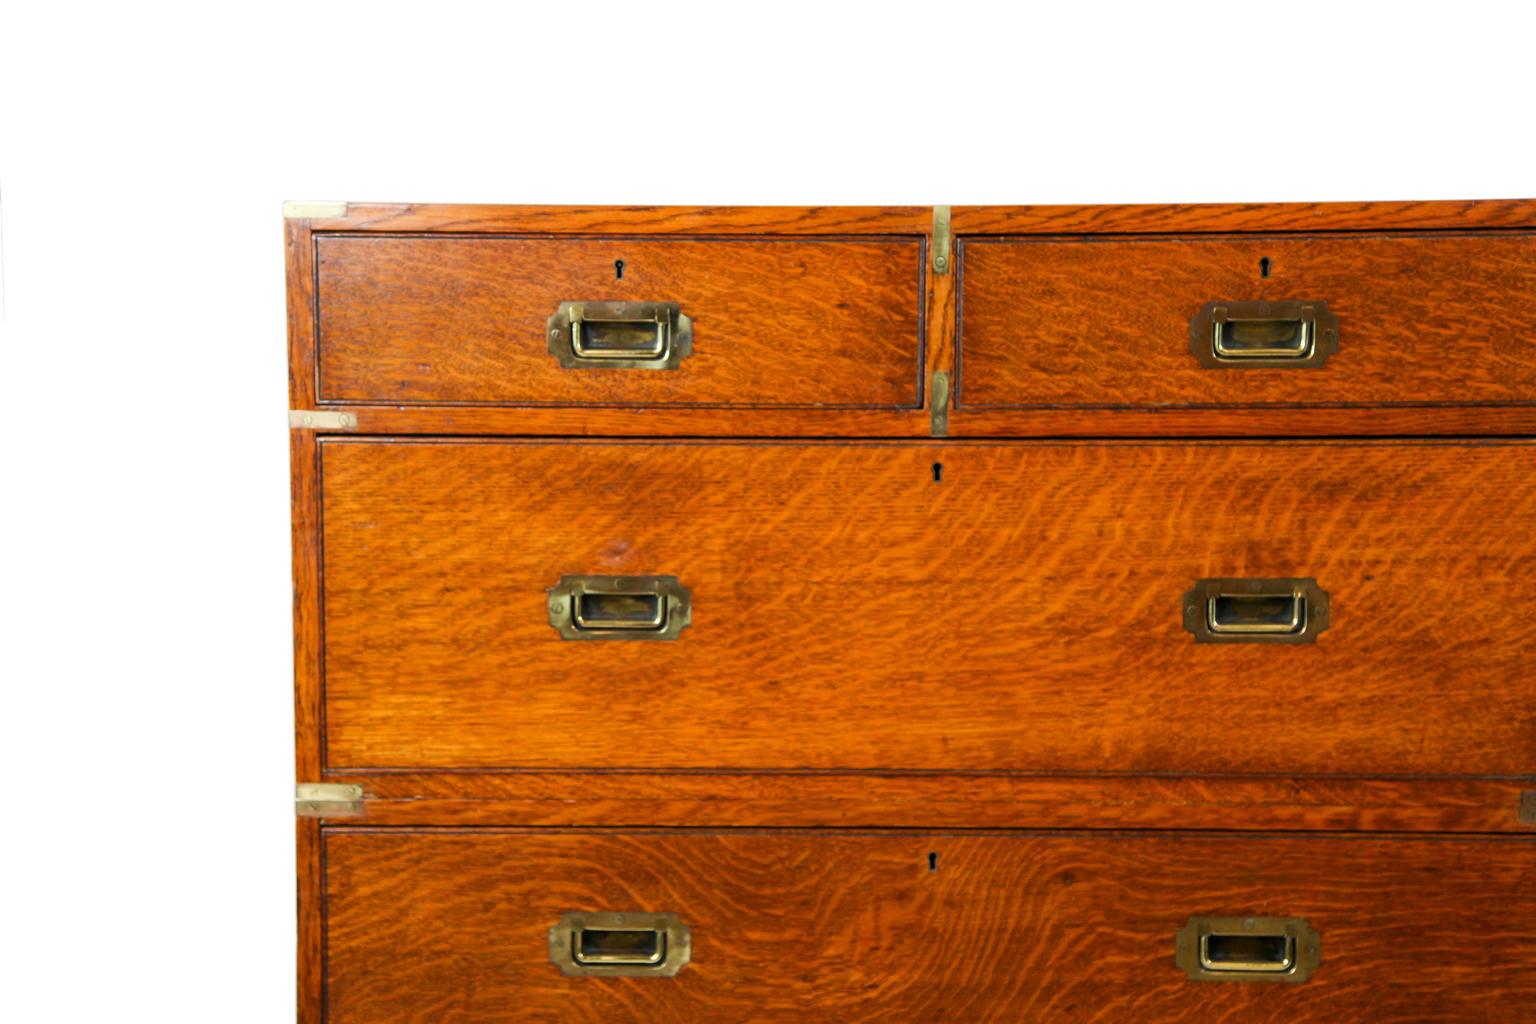 English oak campaign chest, the two section chest with brass top corners and edges, inset Campaign handles, on turned feet.